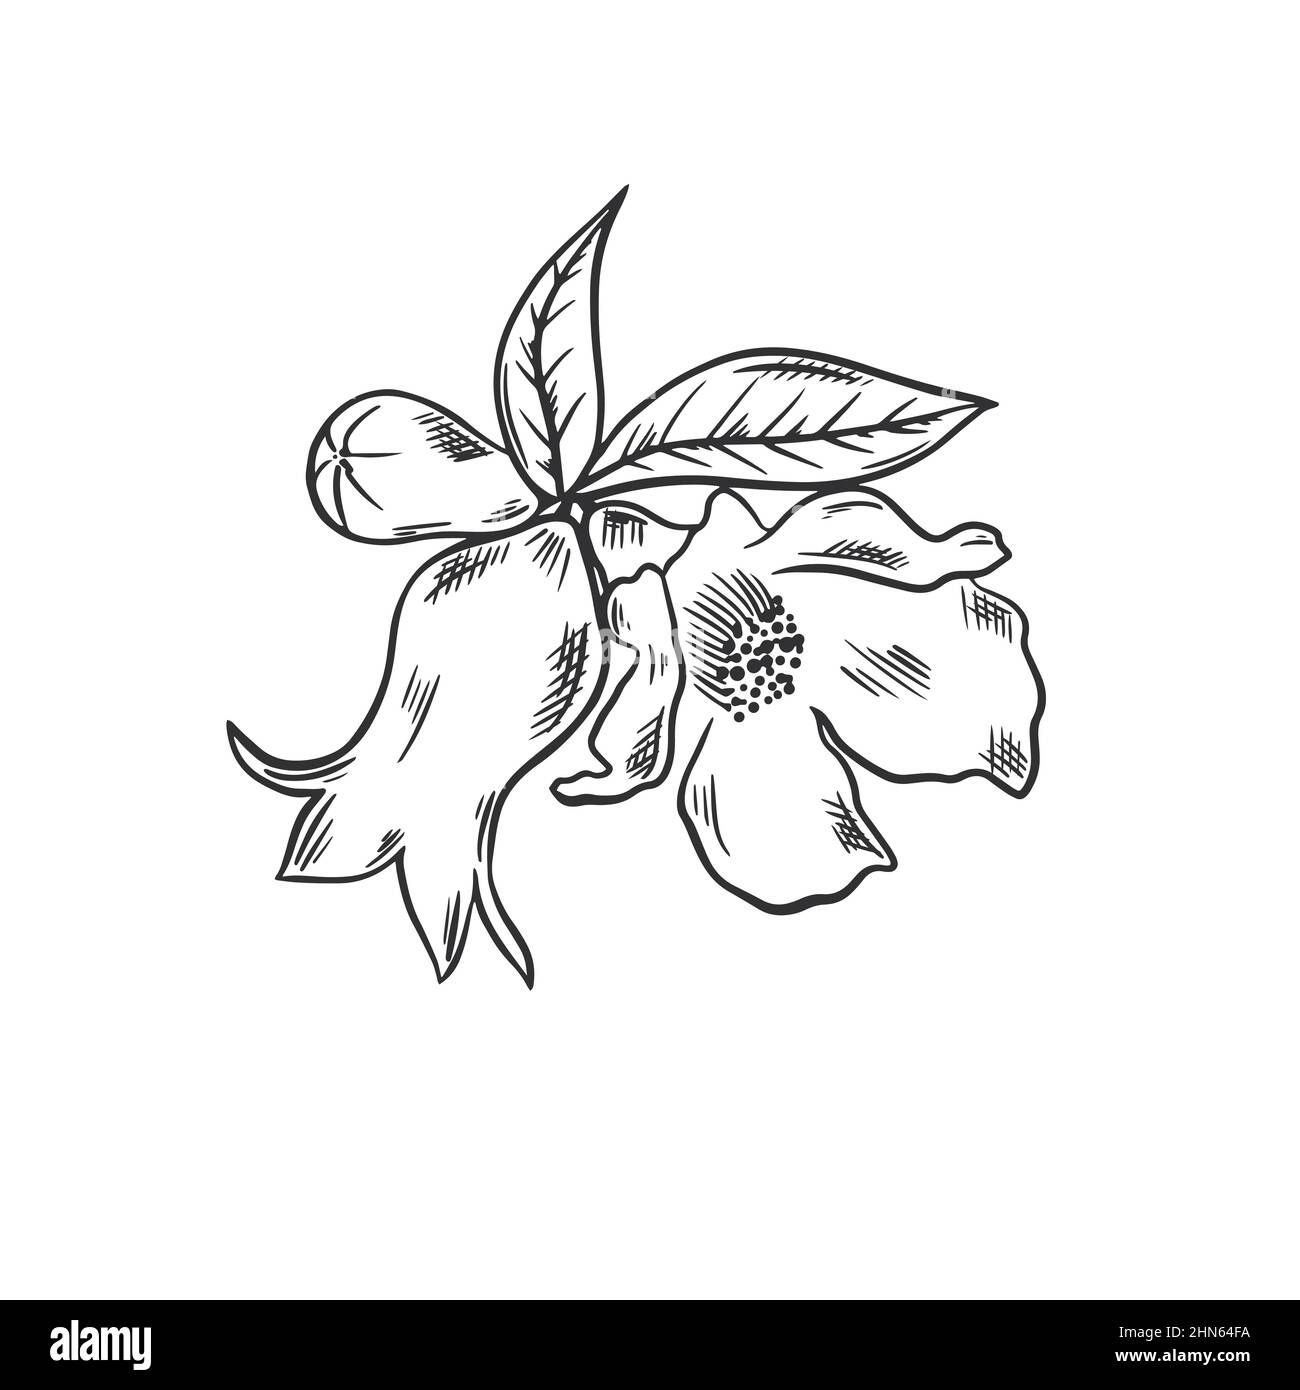 Pomegranate flower hand drawn sketch Stock Vector